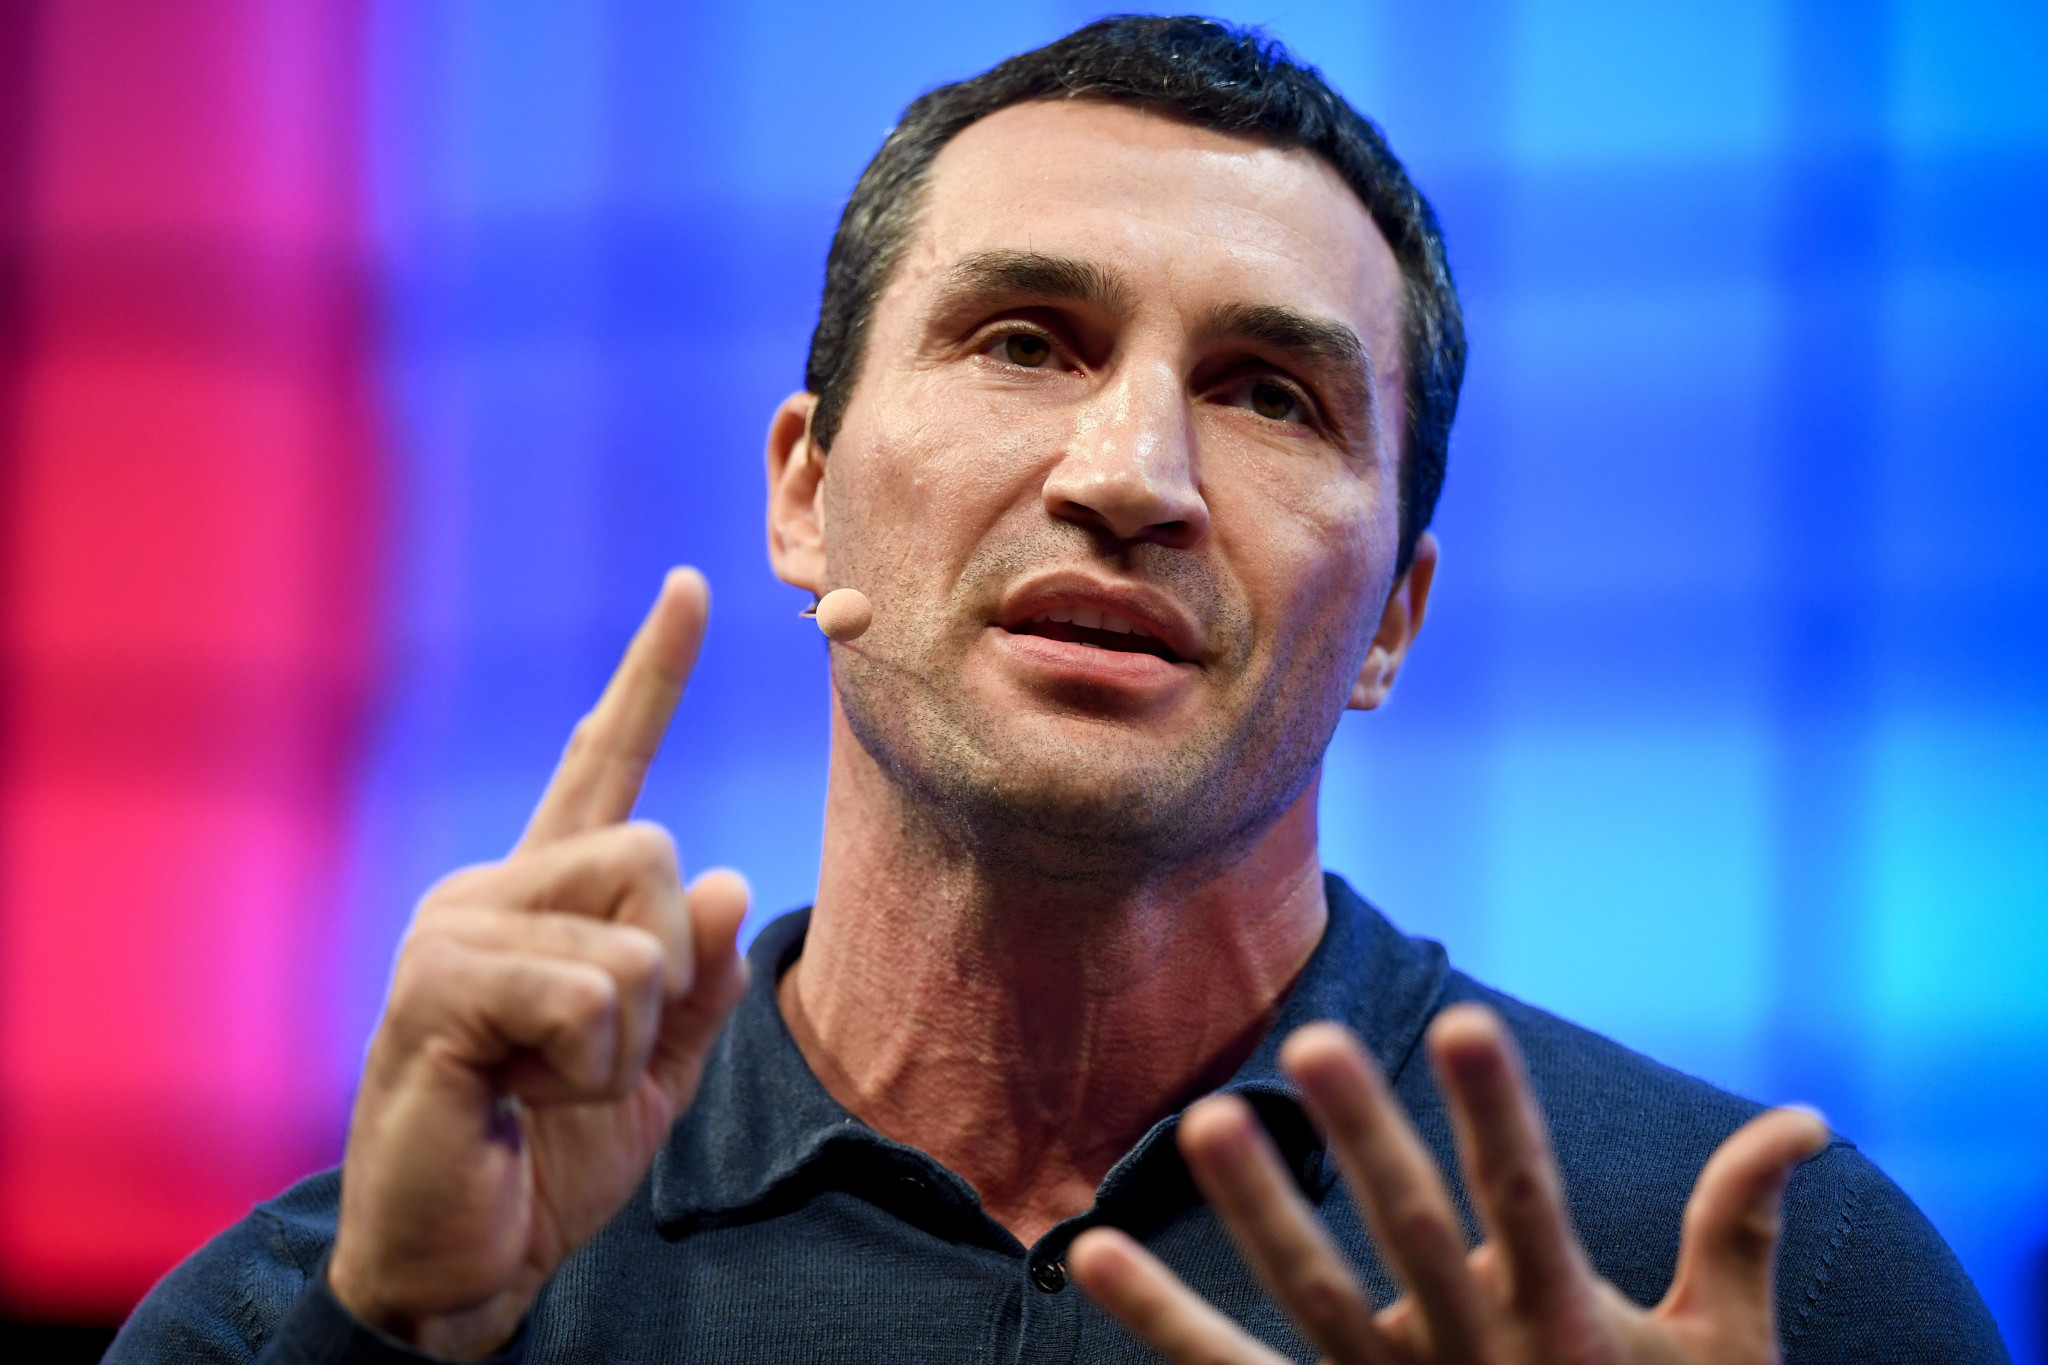 Former world heavyweight champion Wladimir Klitschko has thrown his support behind the World Boxing Association to replace the International Boxing Association as the body responsible for organising boxing at the Olympic Games ©Getty Images